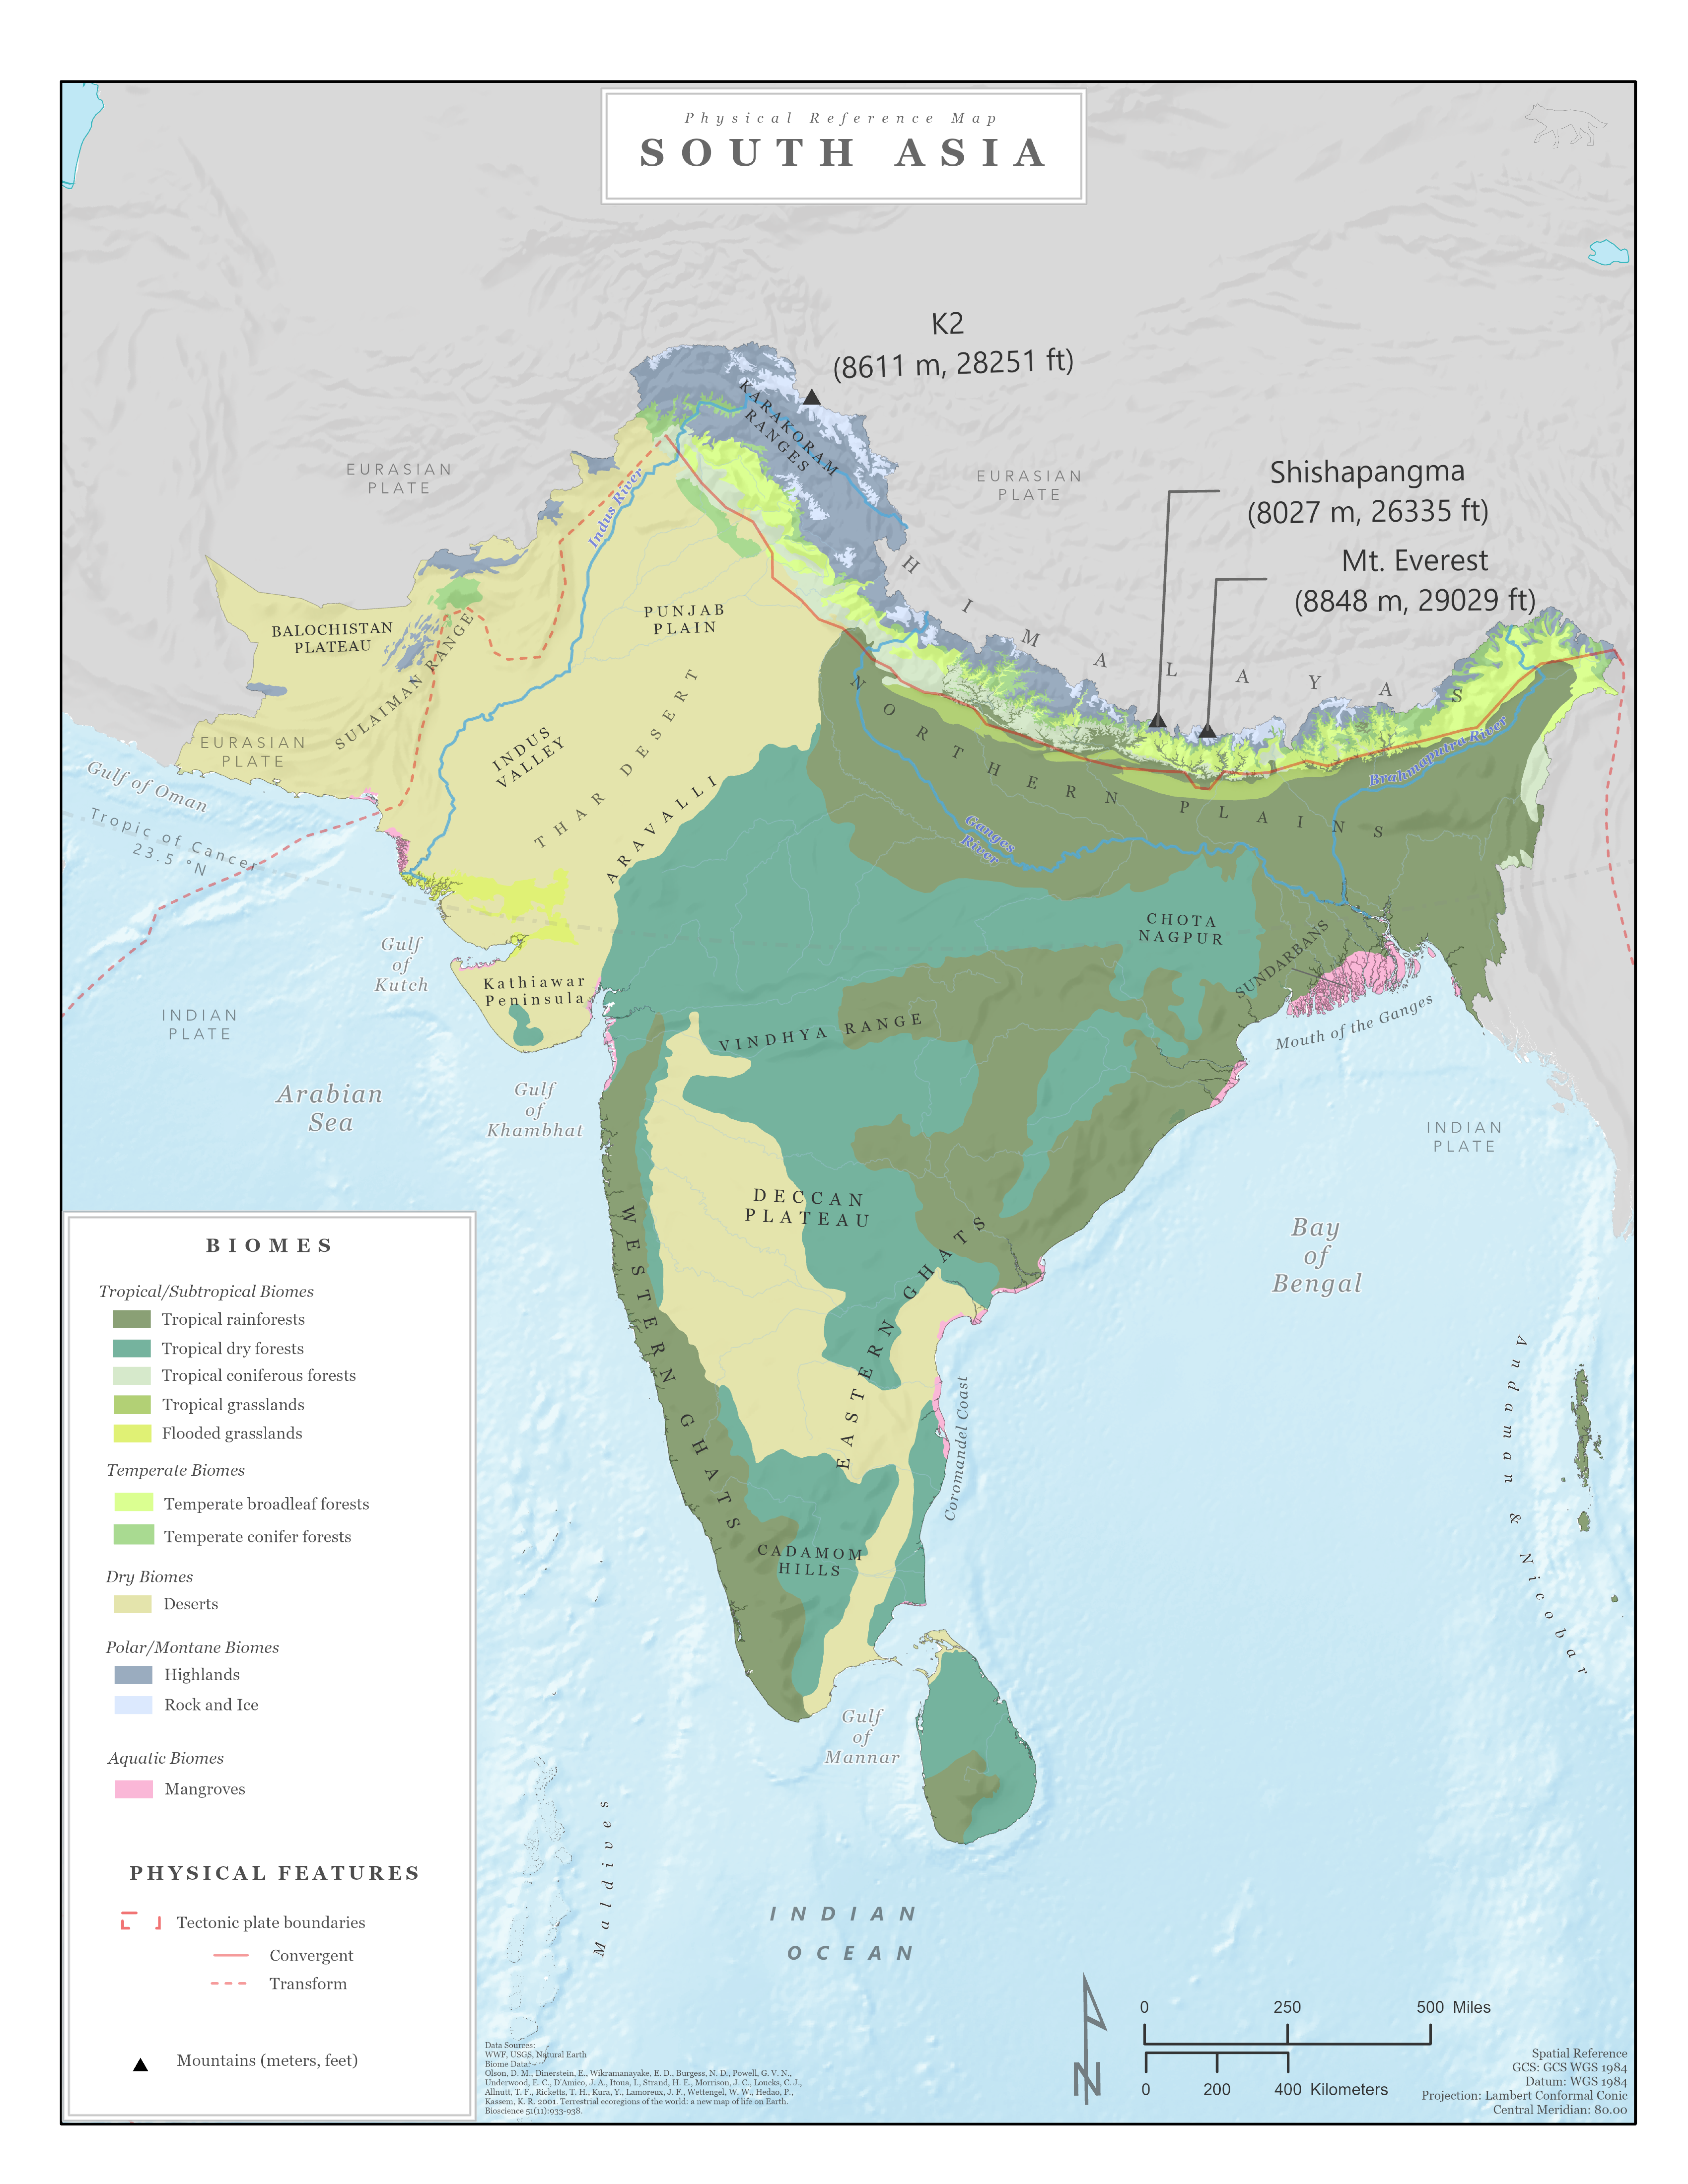 Biome and physical features map of South Asia